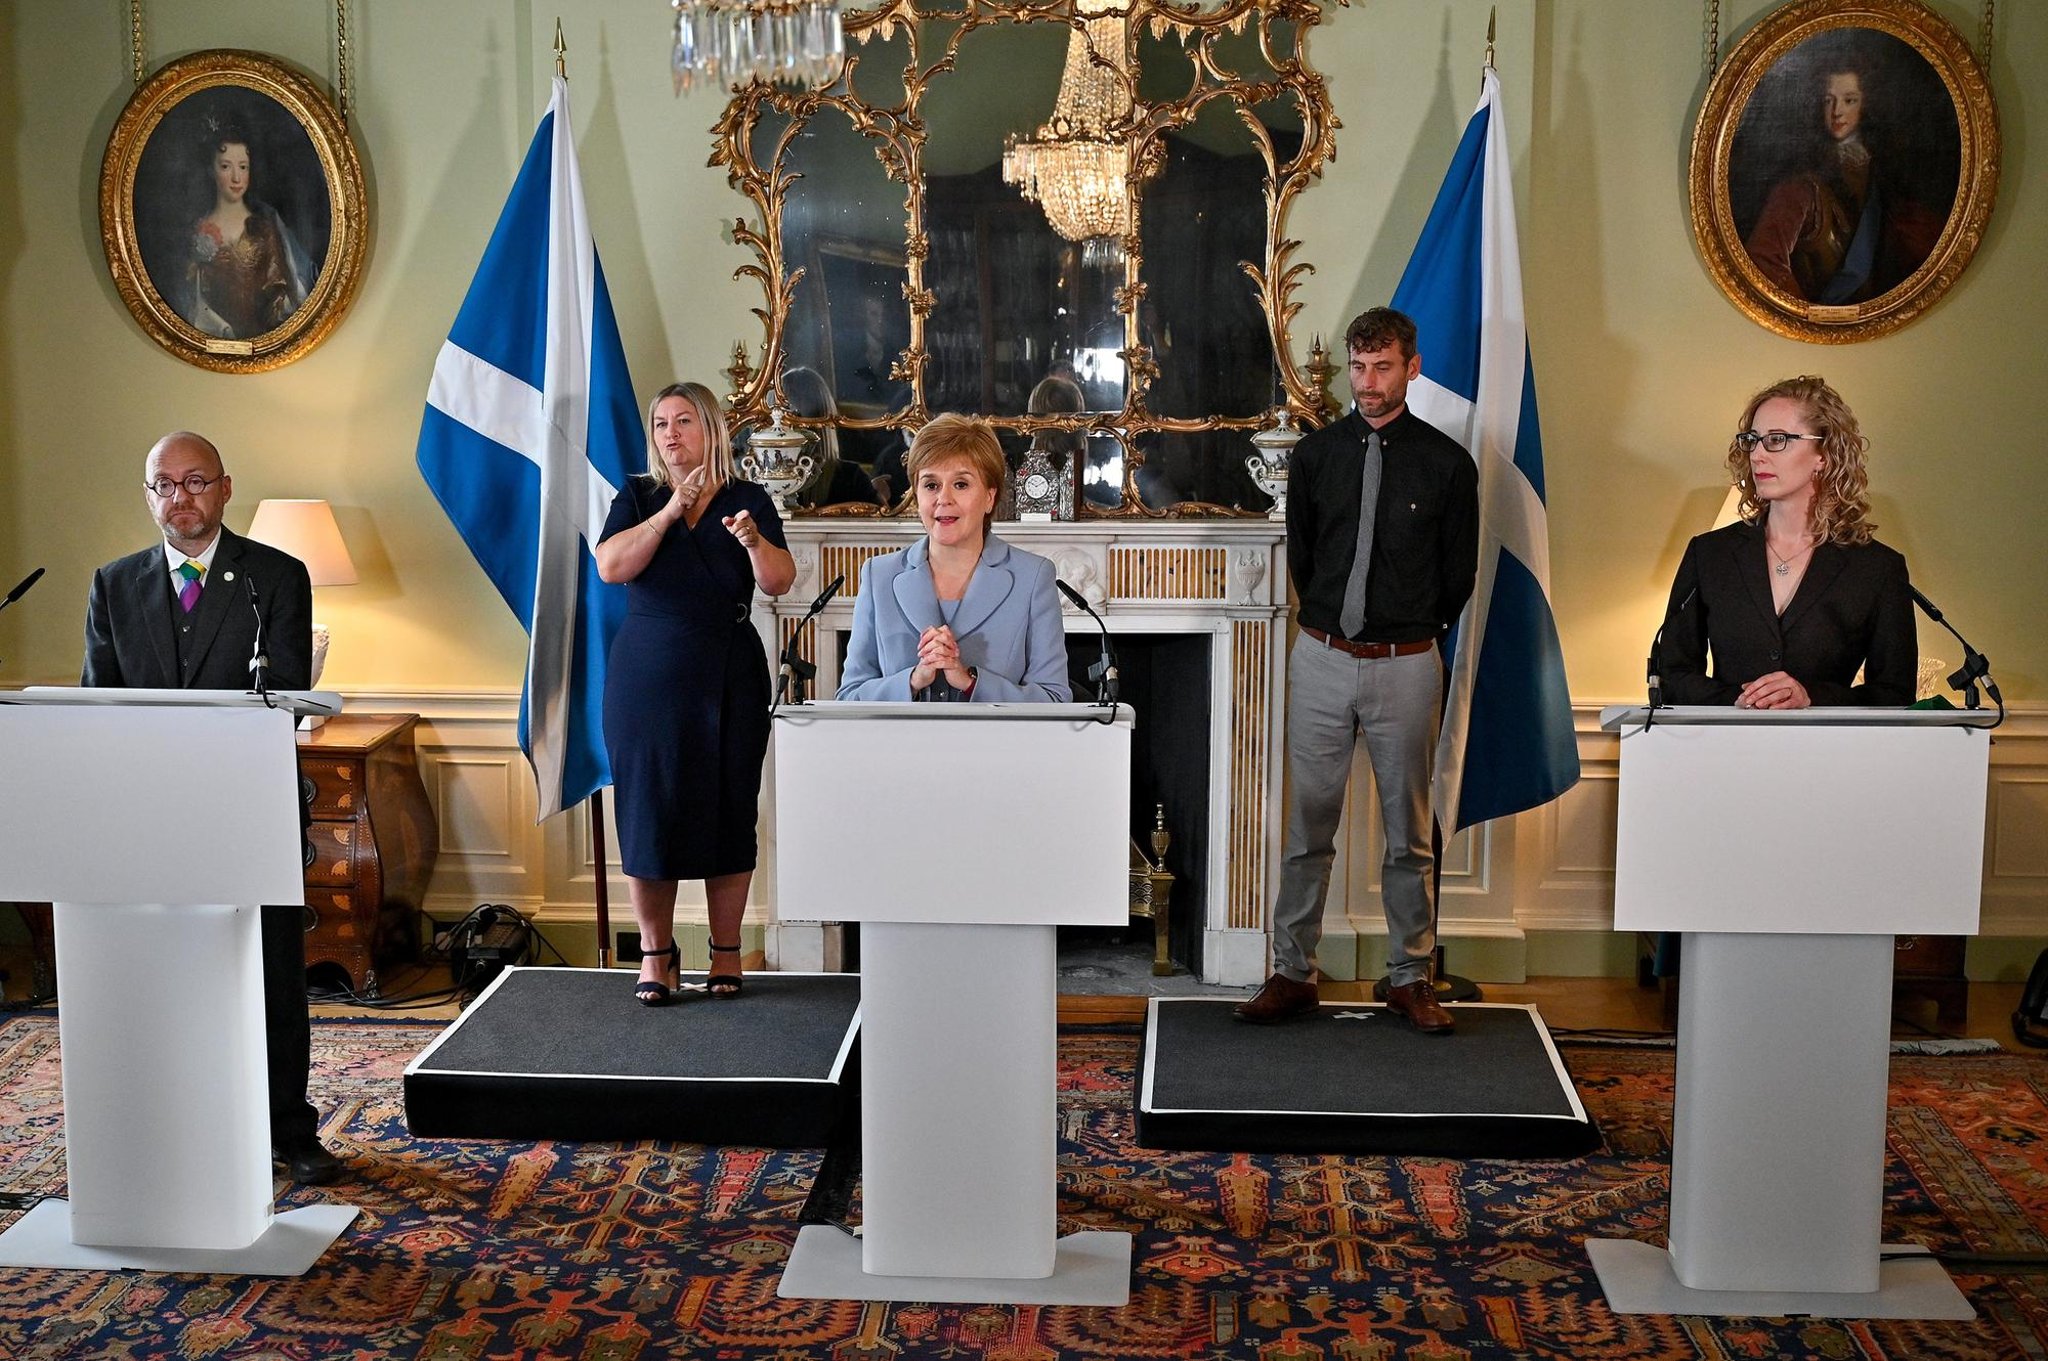 Nicola Sturgeon announcing the power sharing agreement with Scottish Green leaders Lorna Slater and Patrick Harvie 